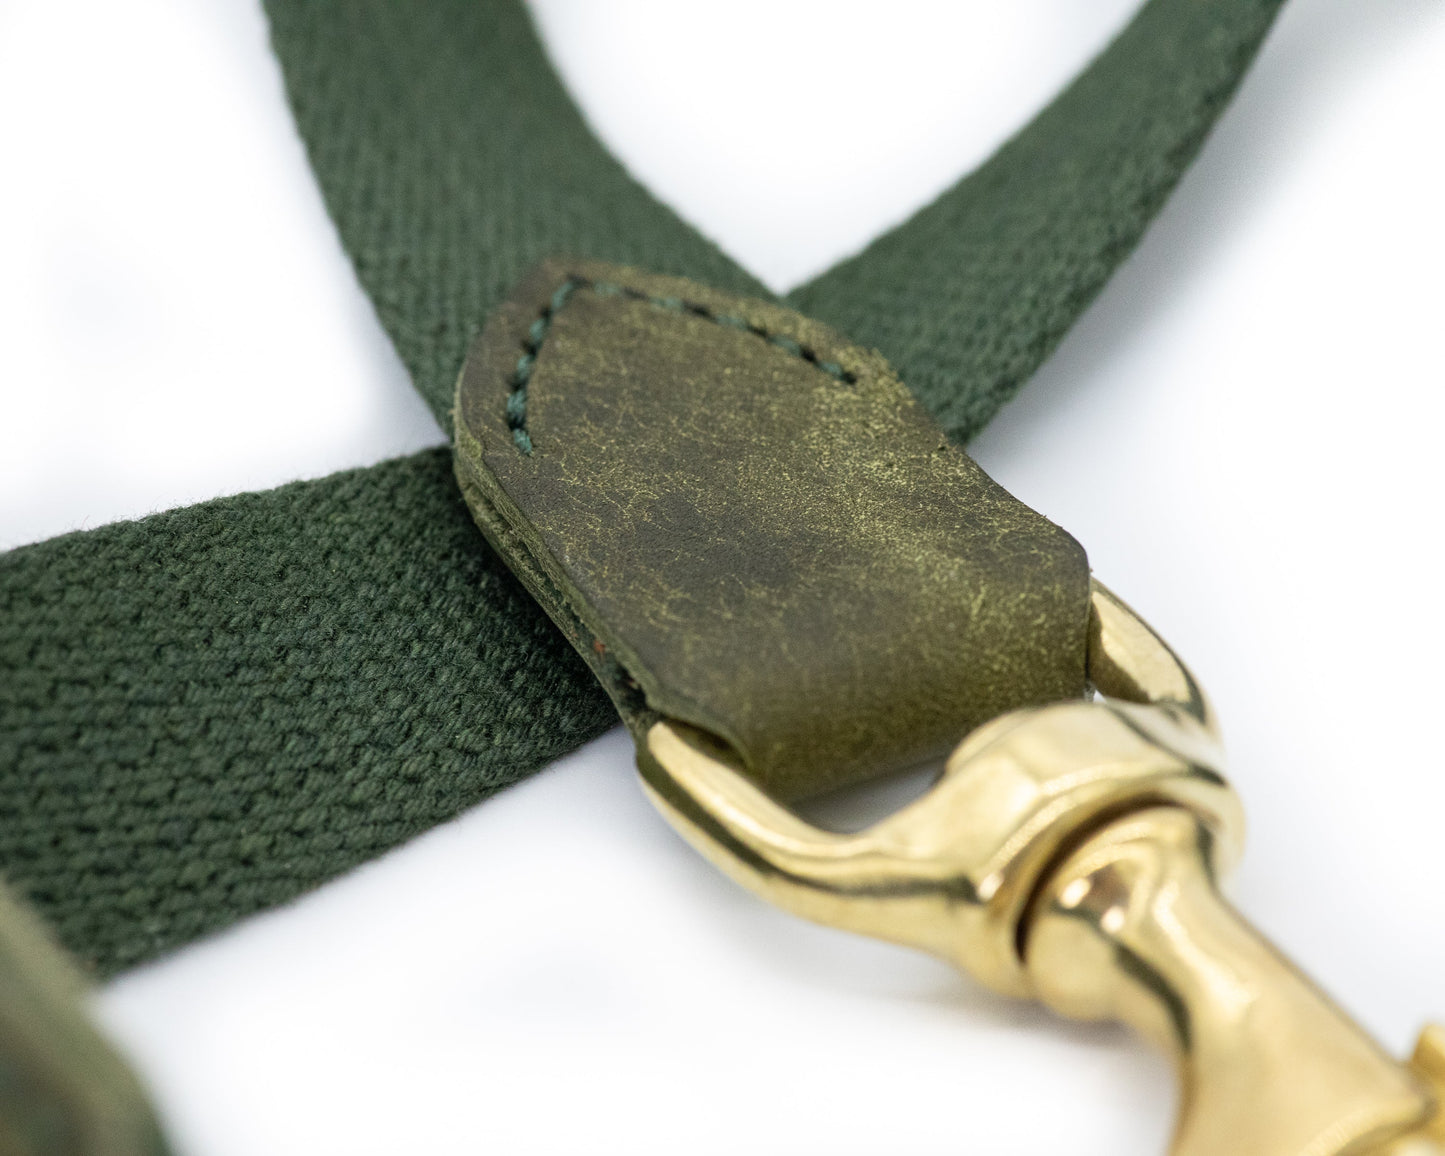 Leather, solid brass & cotton dog lead - Kohutt™ | Enduring Handcrafted Goods